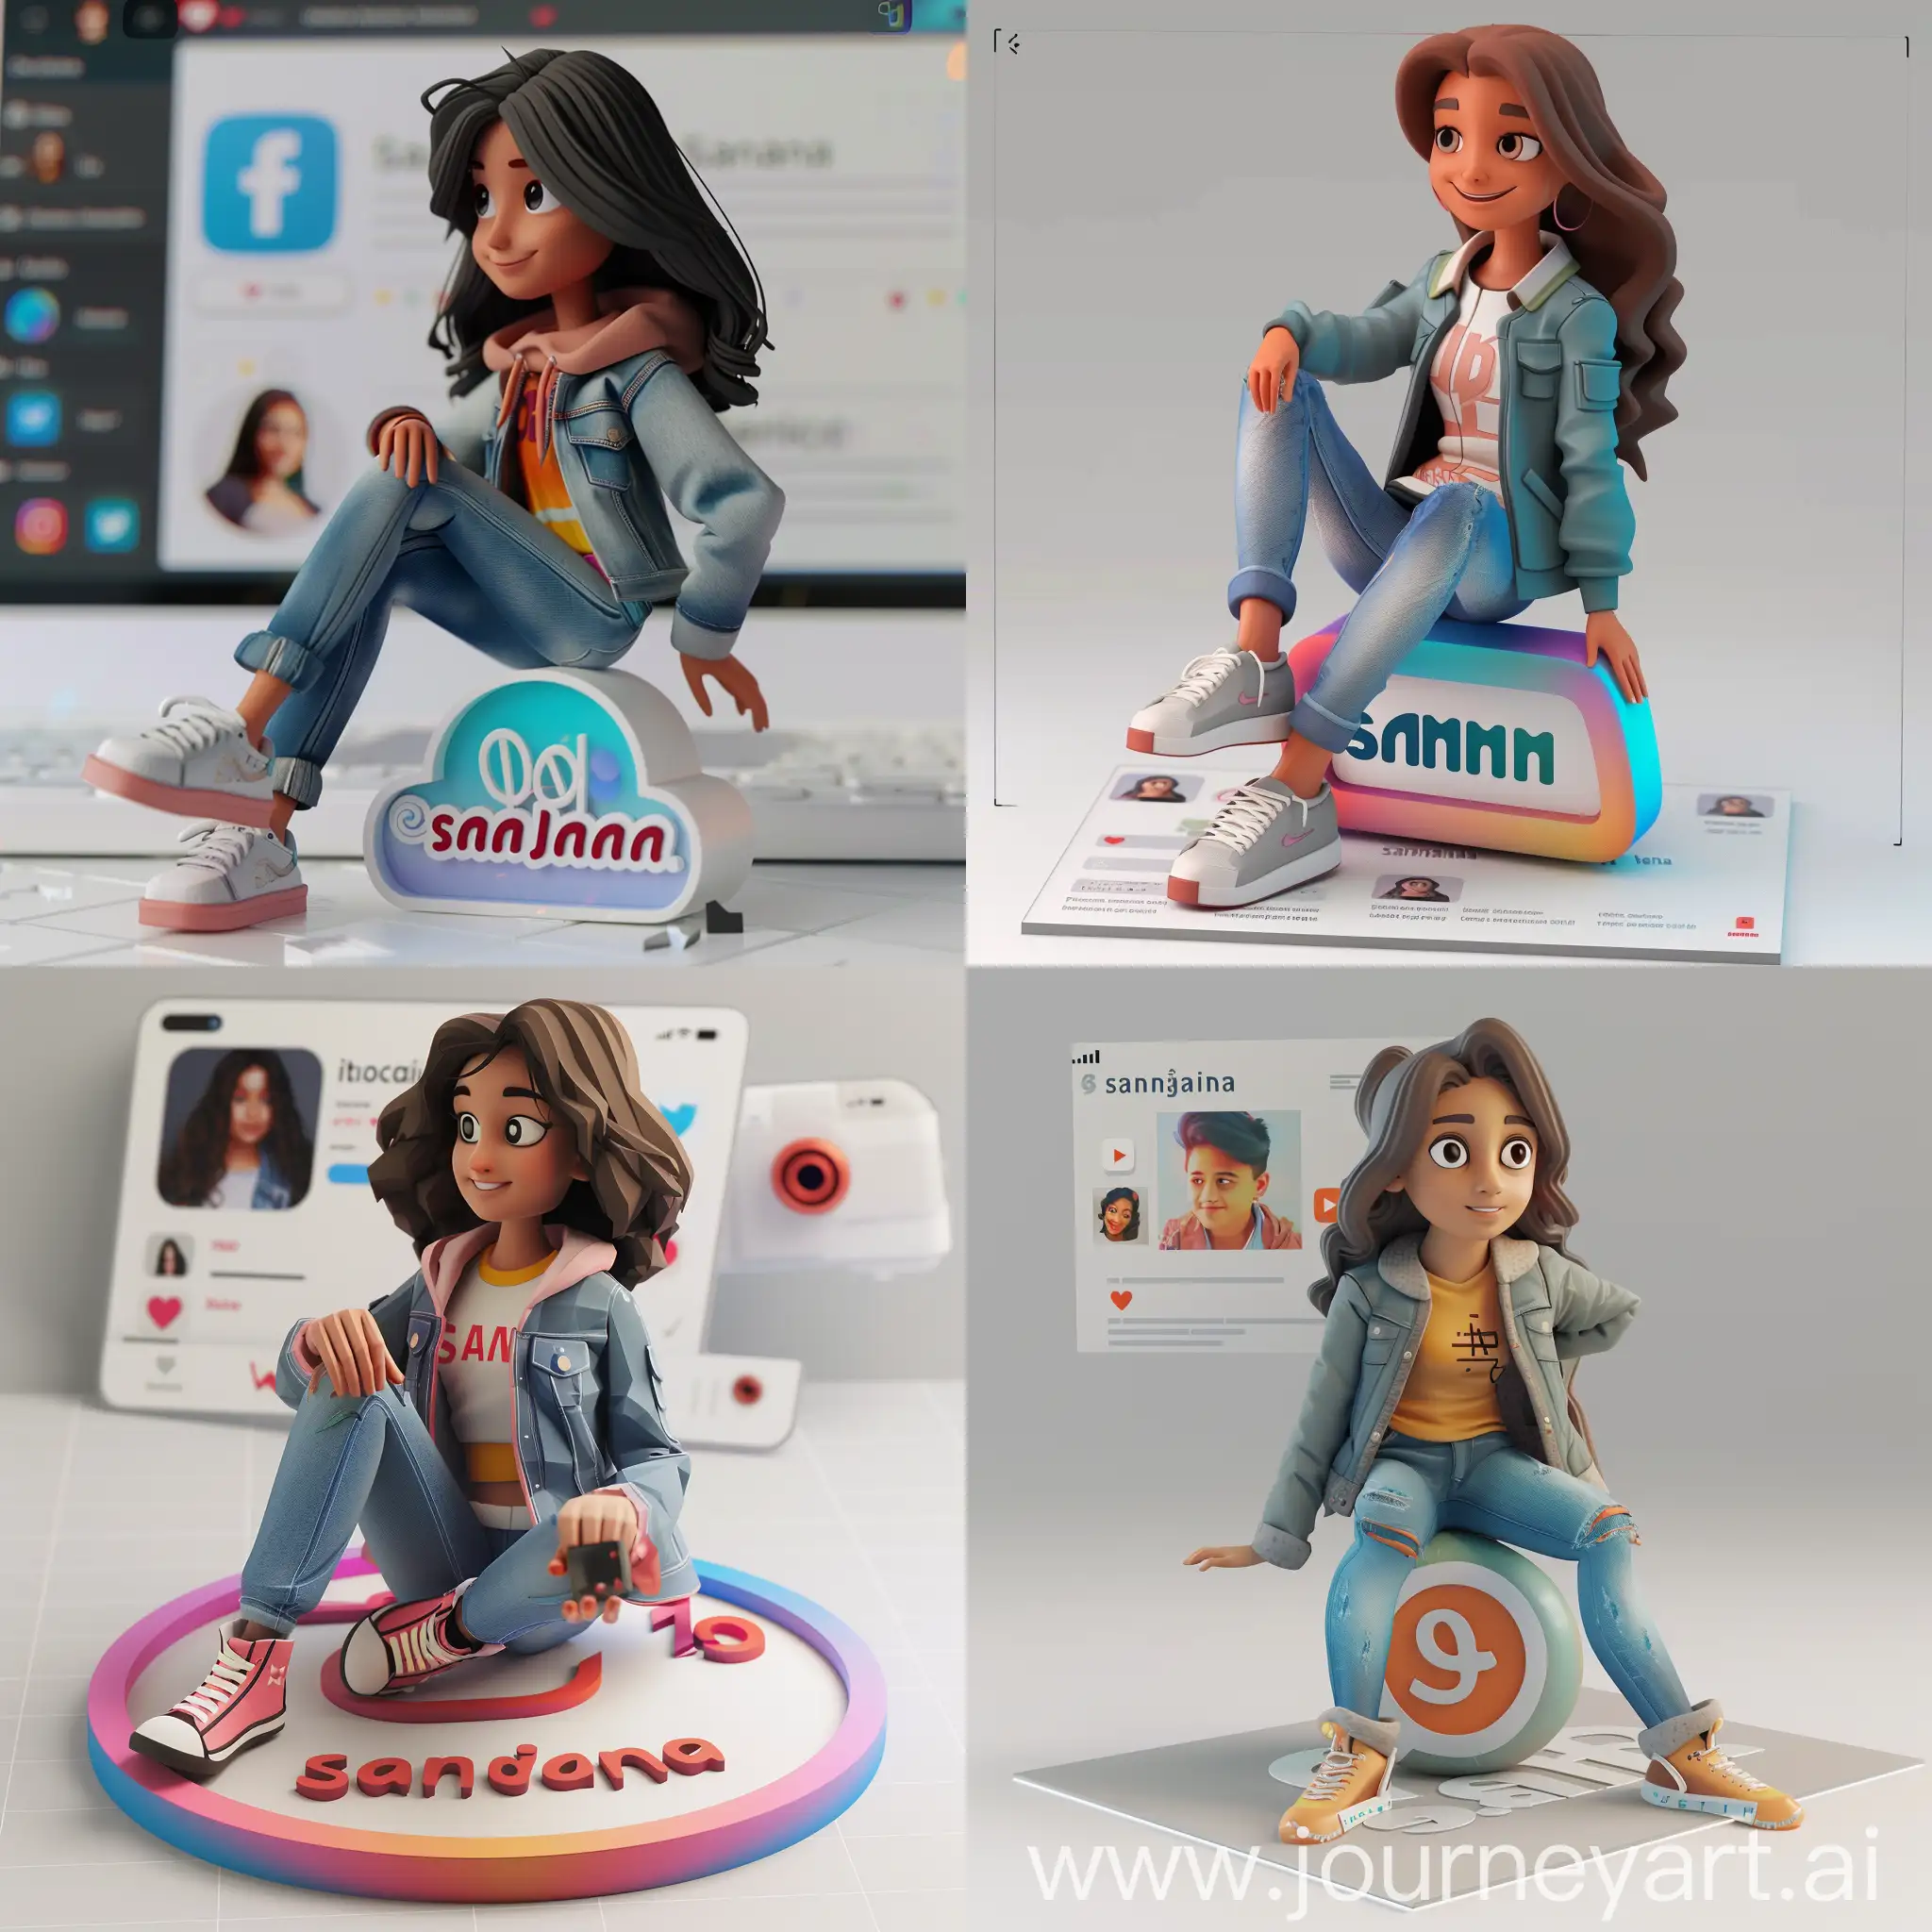 create a 3D illustration of an girl animated character sitting casually on top of a social media logo "instagram". The character must wear casual modern clothing such as jeans jacket and sneakers shoes. The background of the image is a social media profile page with a user name "sanjana" and a profile picture that match.